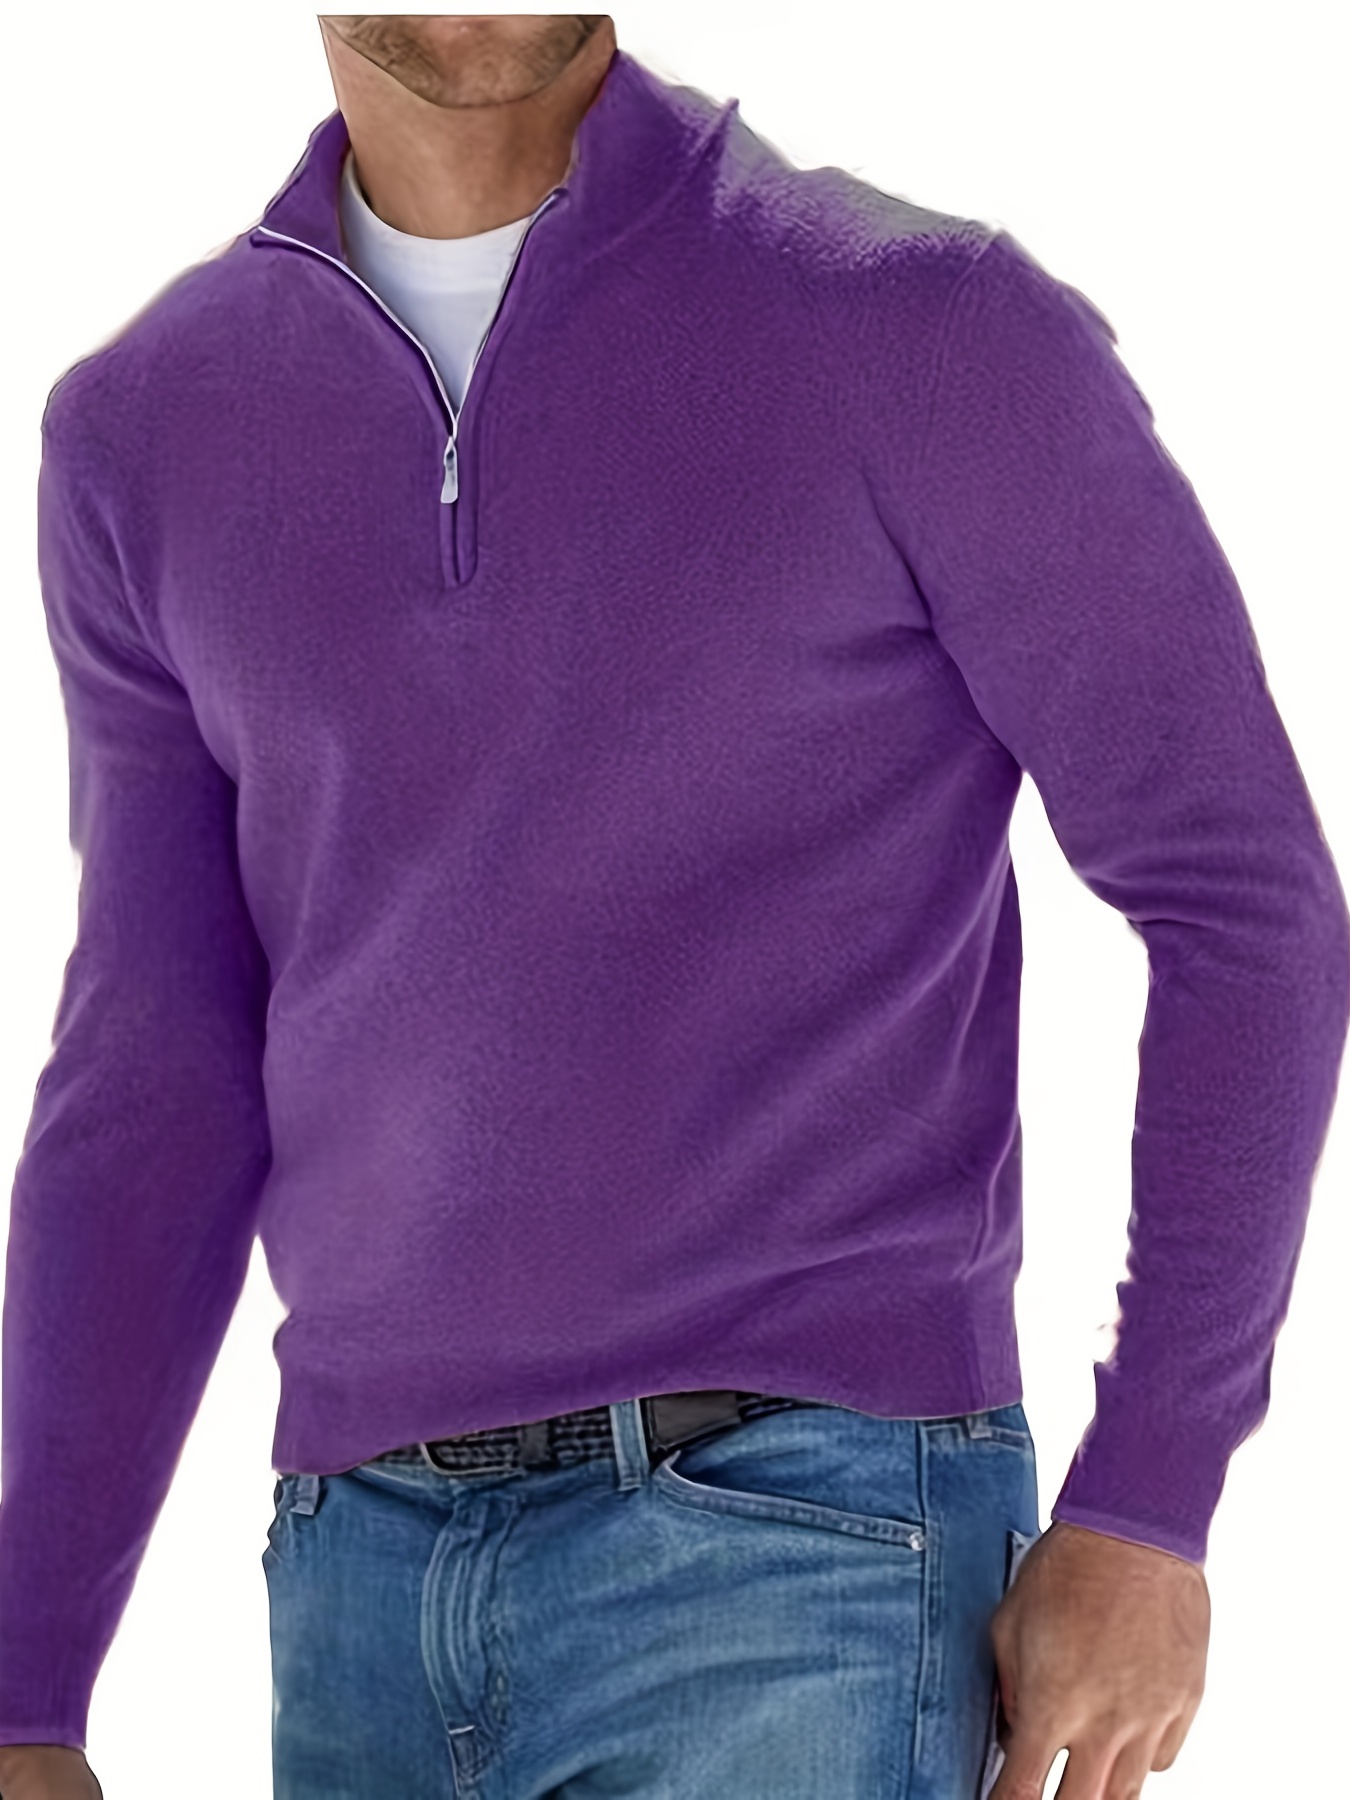 Long Sleeves Zipper Stand Collar Pullover Tops, Men's Casual Top